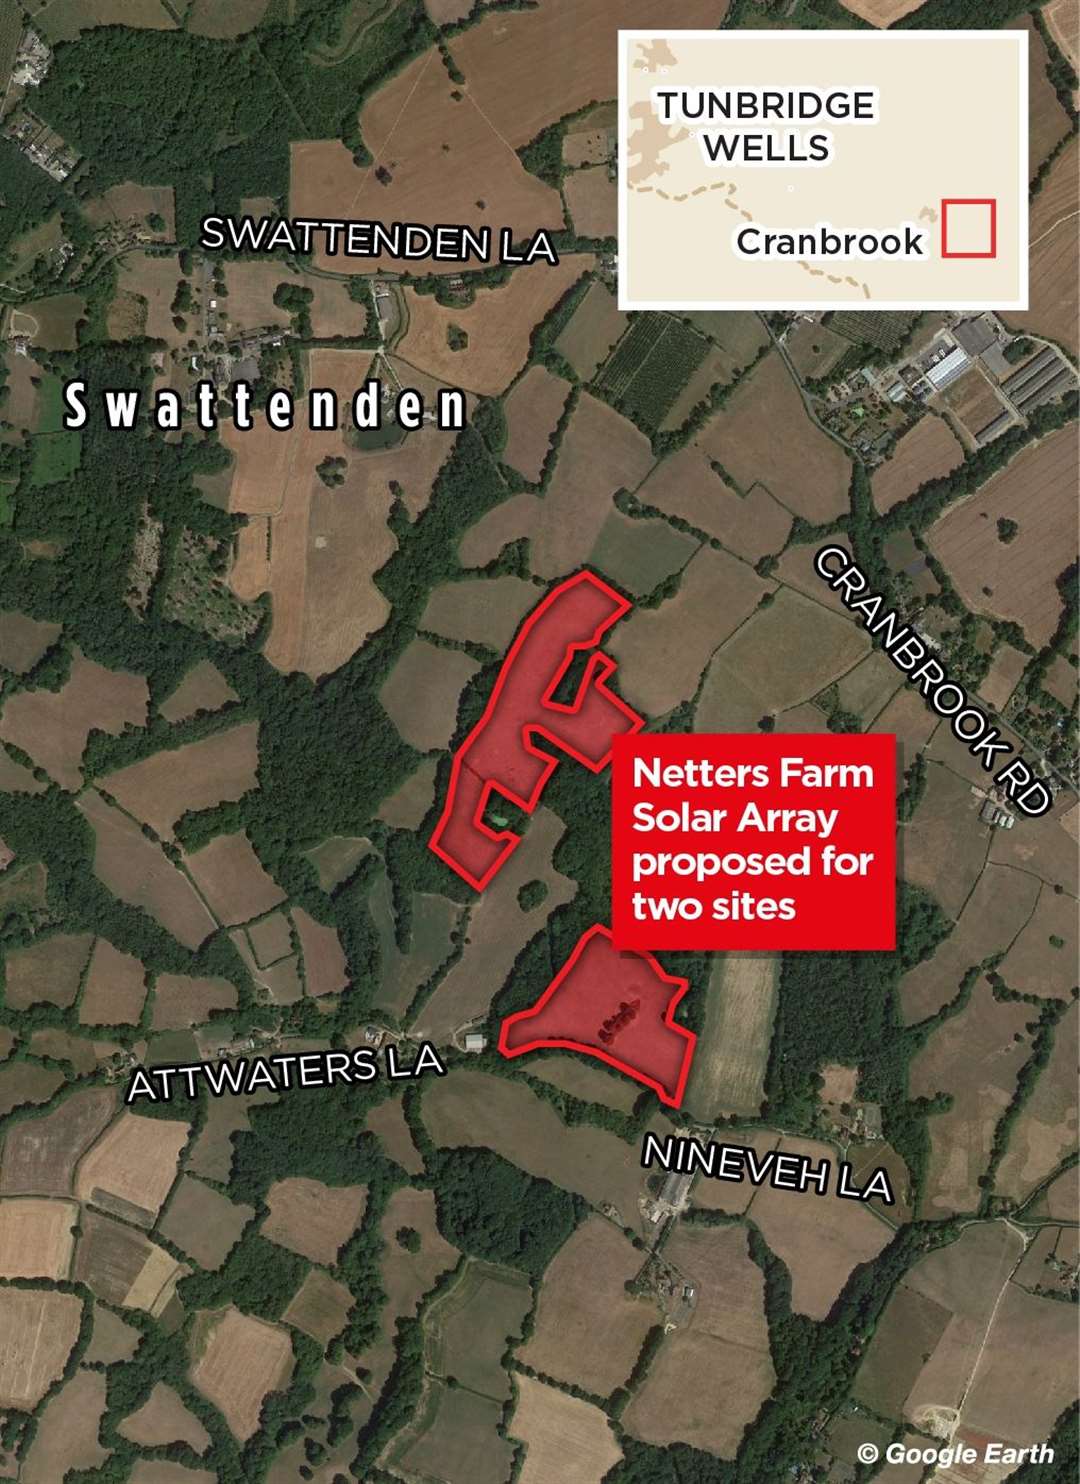 The site of the proposed solar farm, which straddles Cranbrook and Benenden